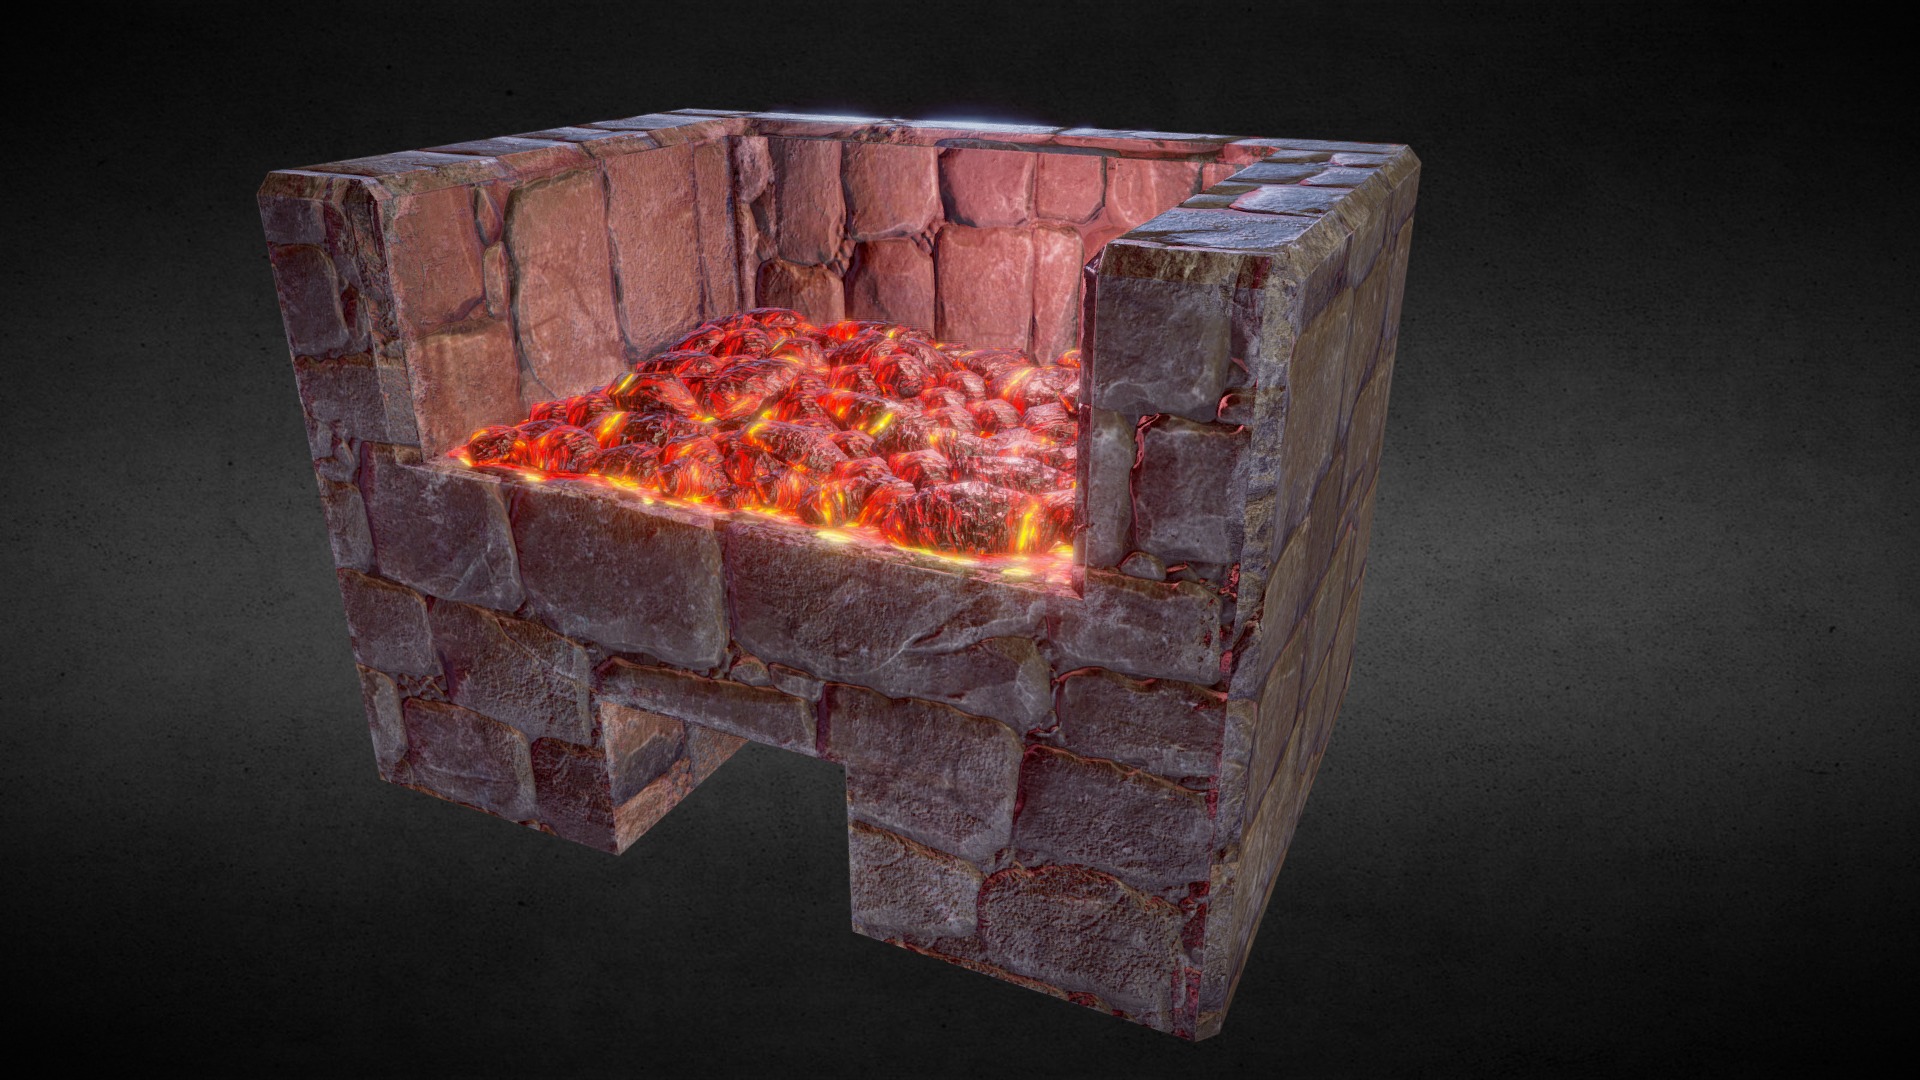 3D model Forge - This is a 3D model of the Forge. The 3D model is about a brick oven with a fire inside.